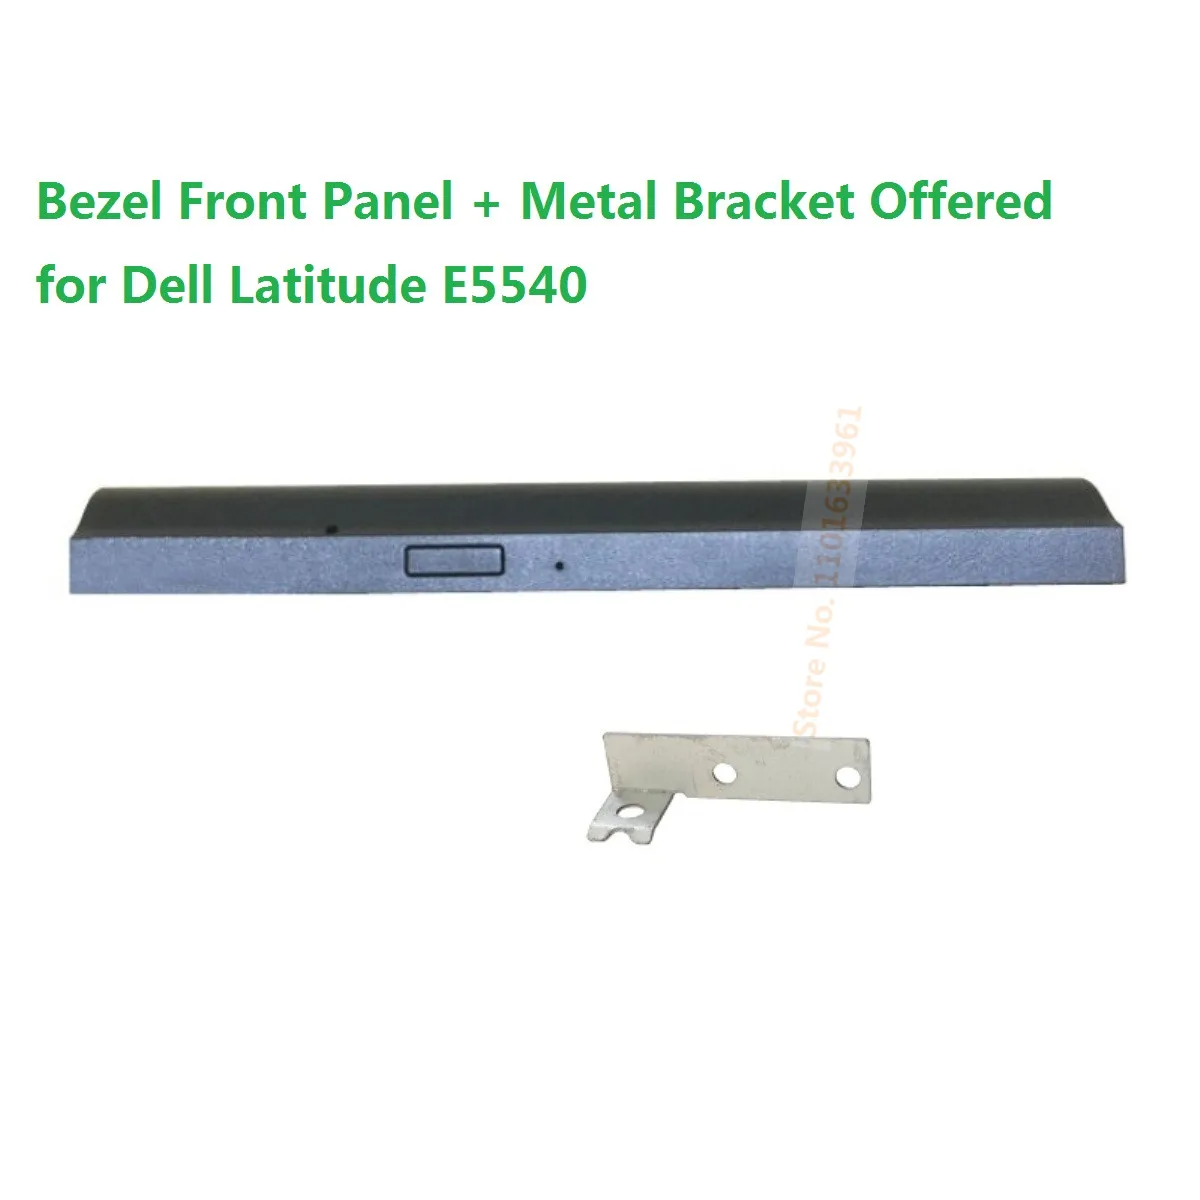 

DVD ODD Optical Drive Bezel Front Panel Faceplate Caddy Cover Mounting Metal Bracket for Dell Latitude E5540